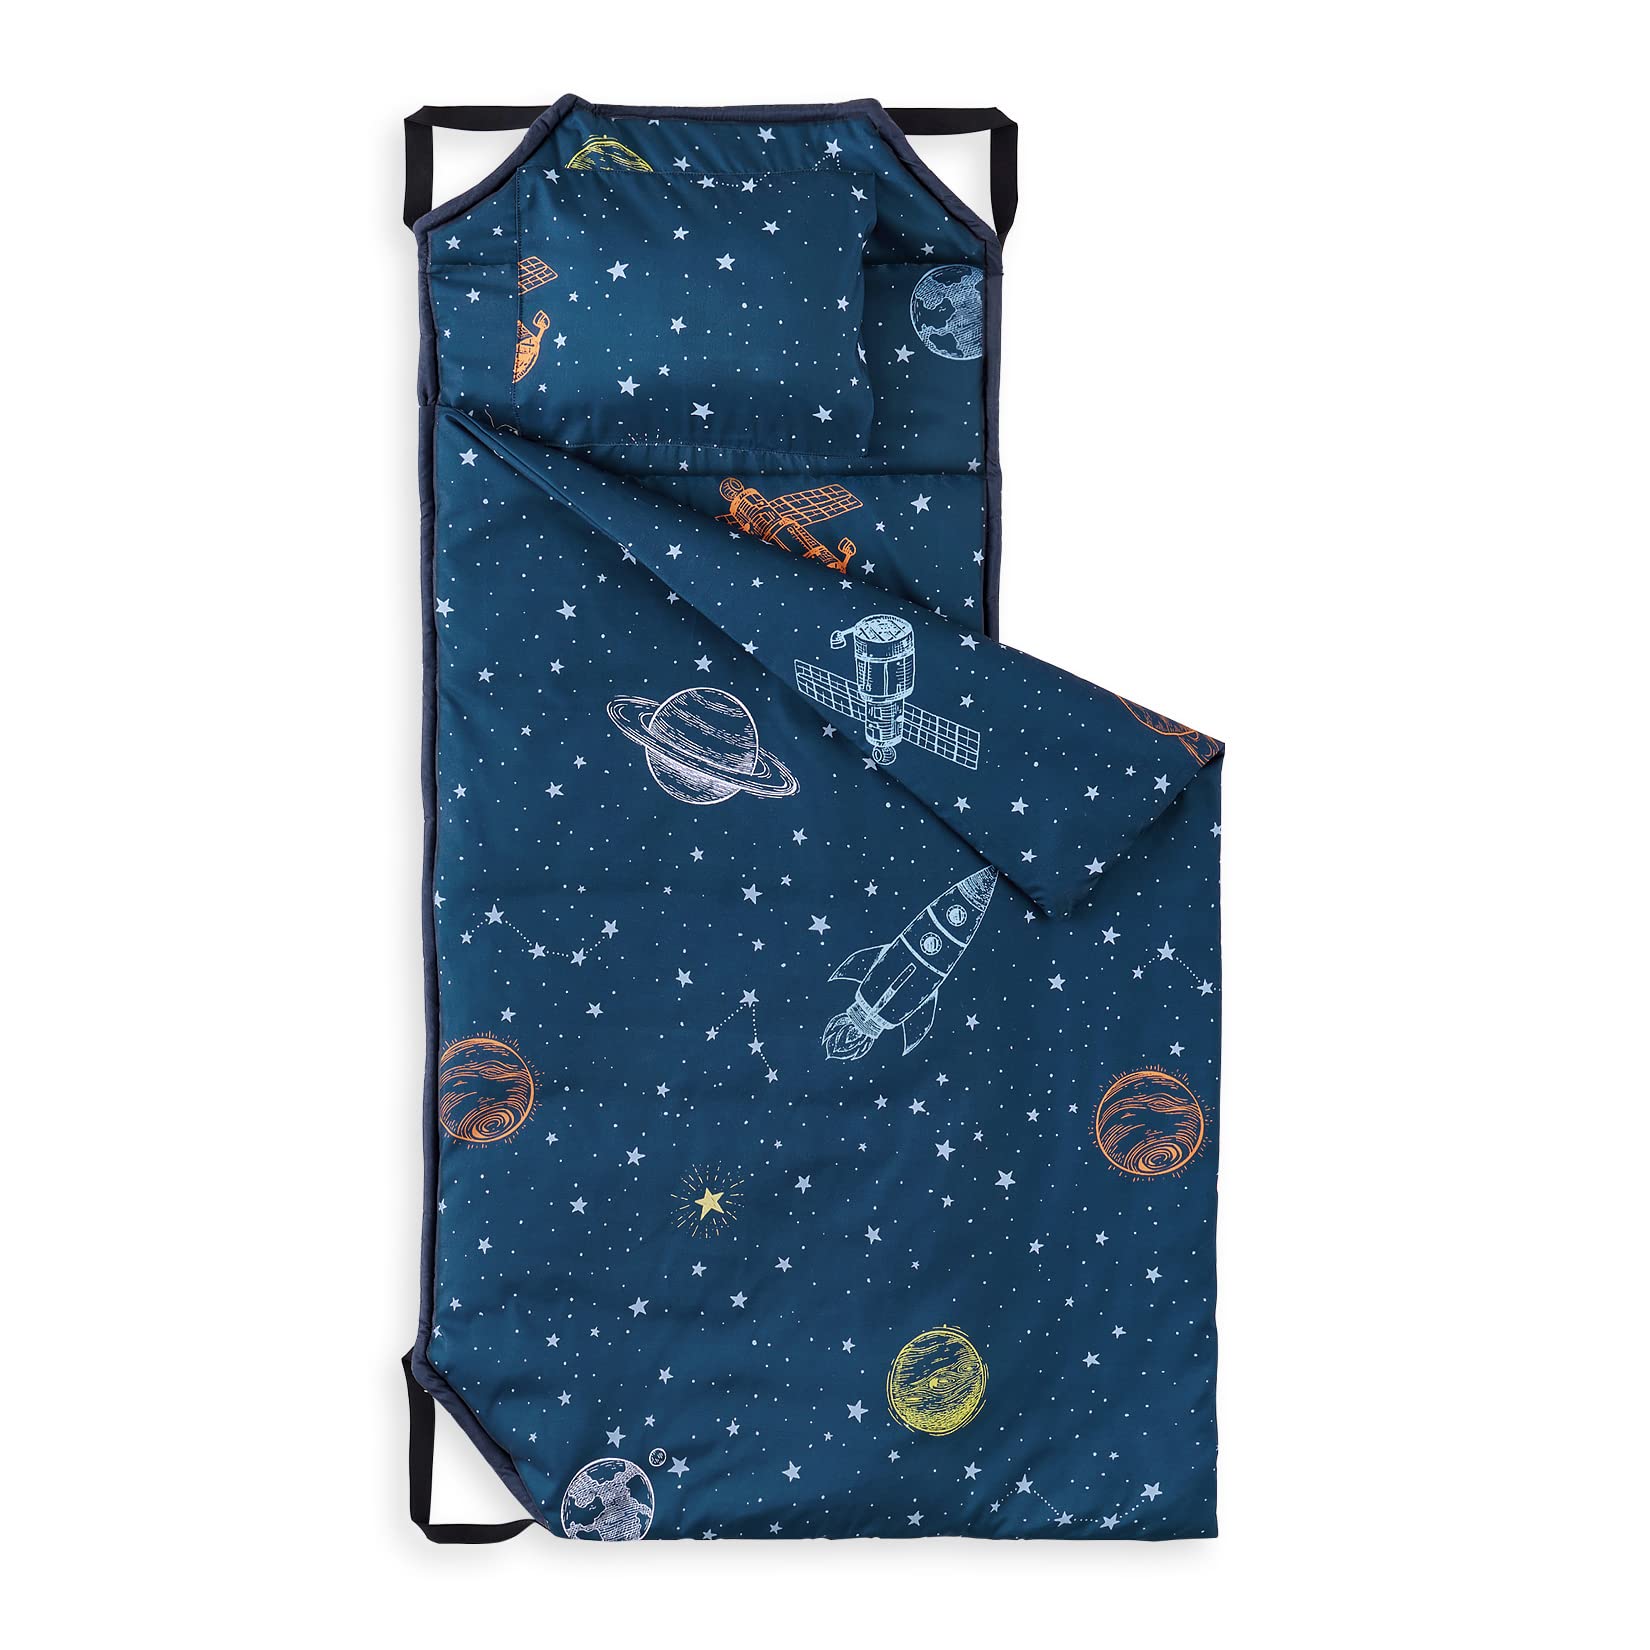 Wake In Cloud - Nap Mat with Pillow for Kids Toddler Boys Girls, Fit Preschool Daycare Sleeping Cot with Elastic Corner Straps, Rockets Stars Galaxy Space Planet on Navy Blue, 100% Soft Microfiber